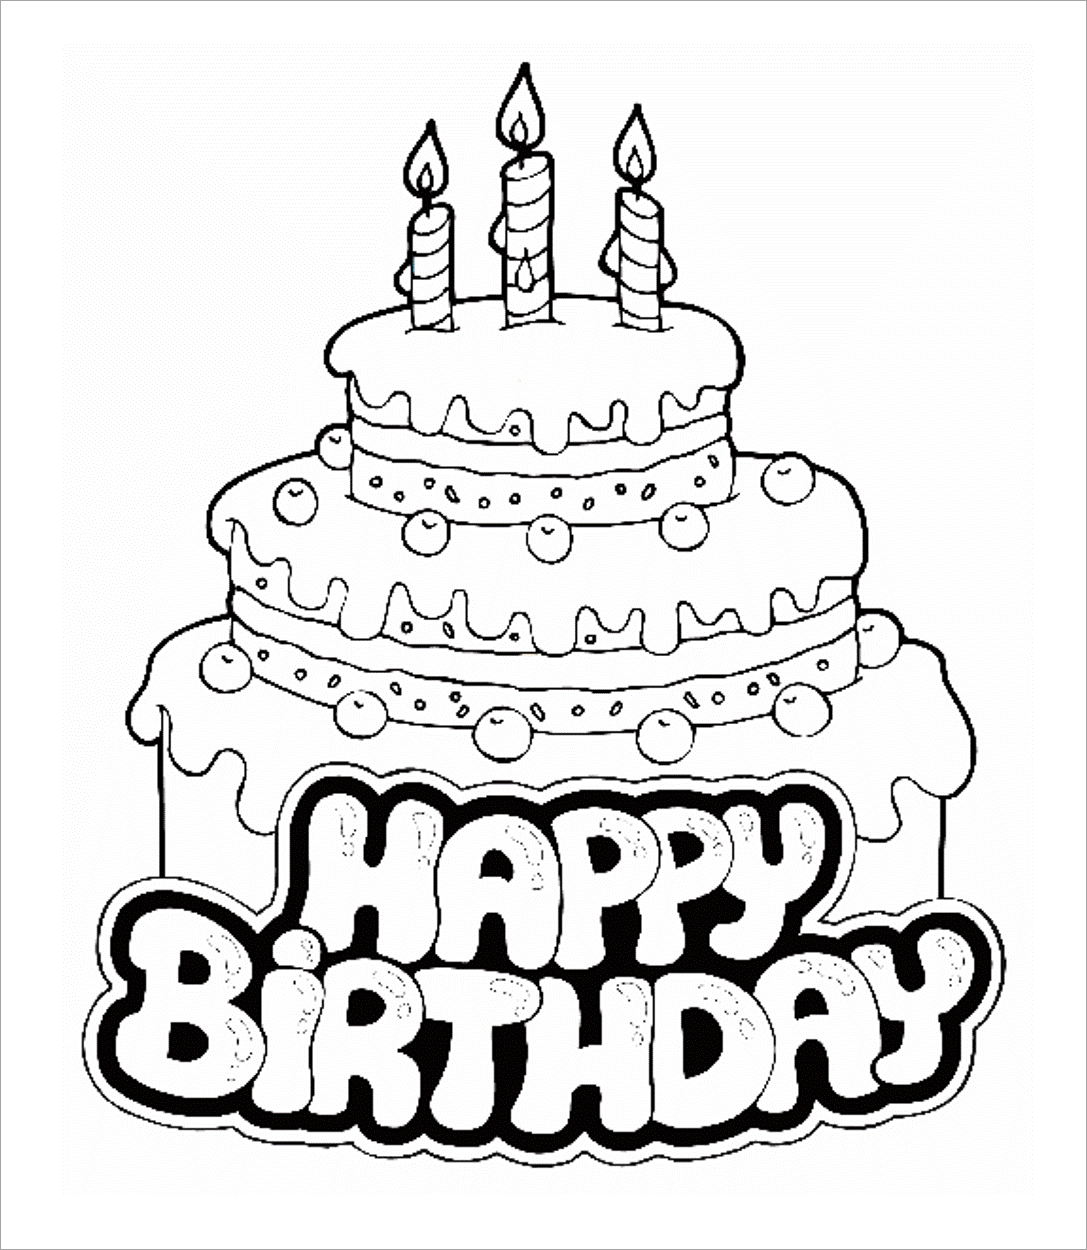 Coloring picture of birthday cake theme